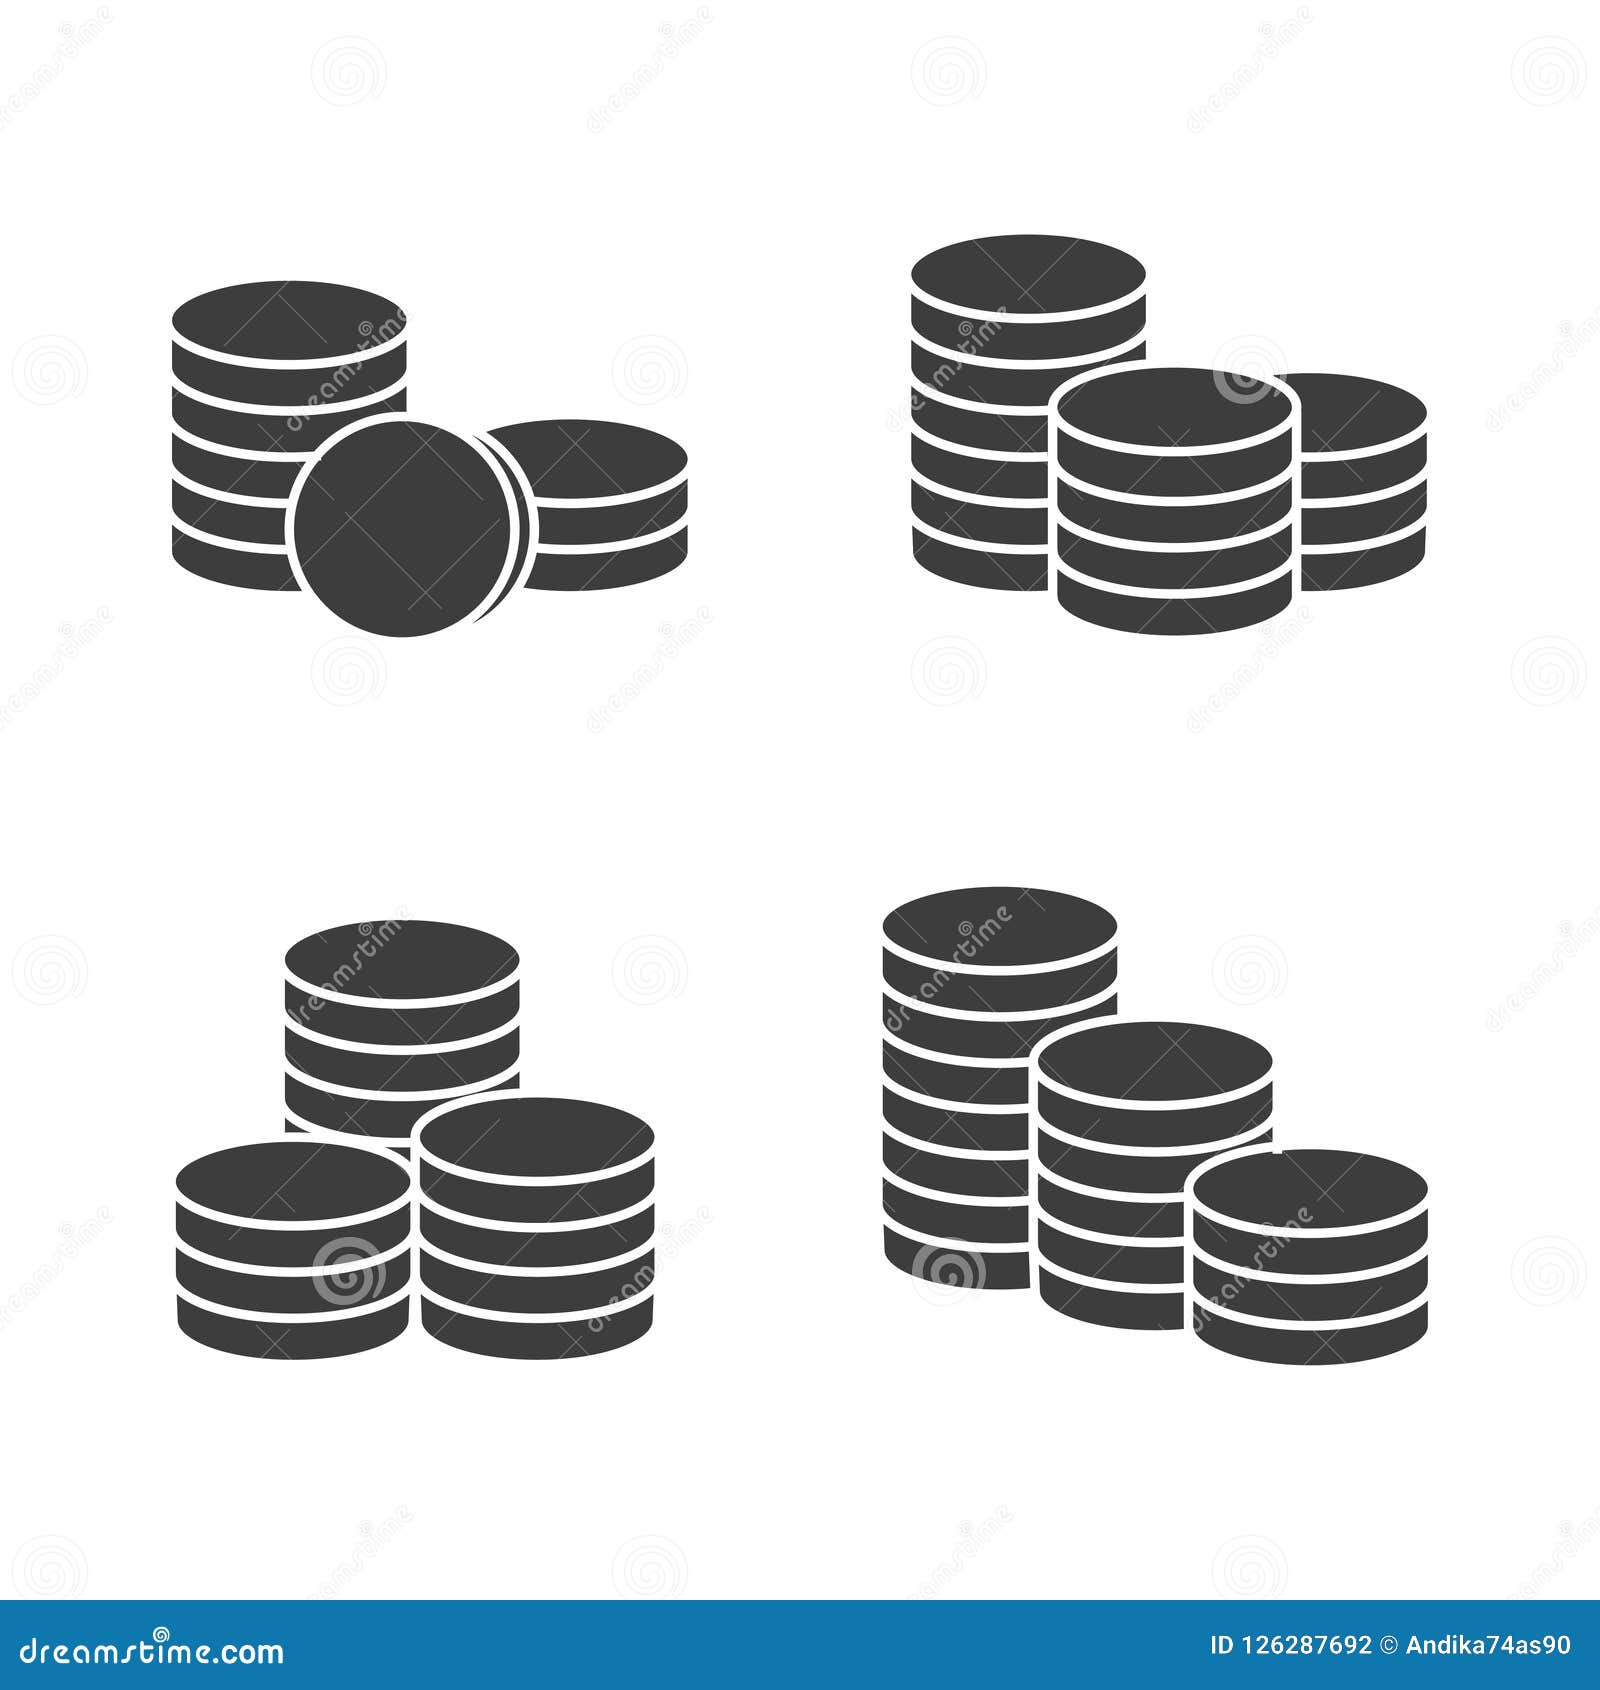  coins stack  icon